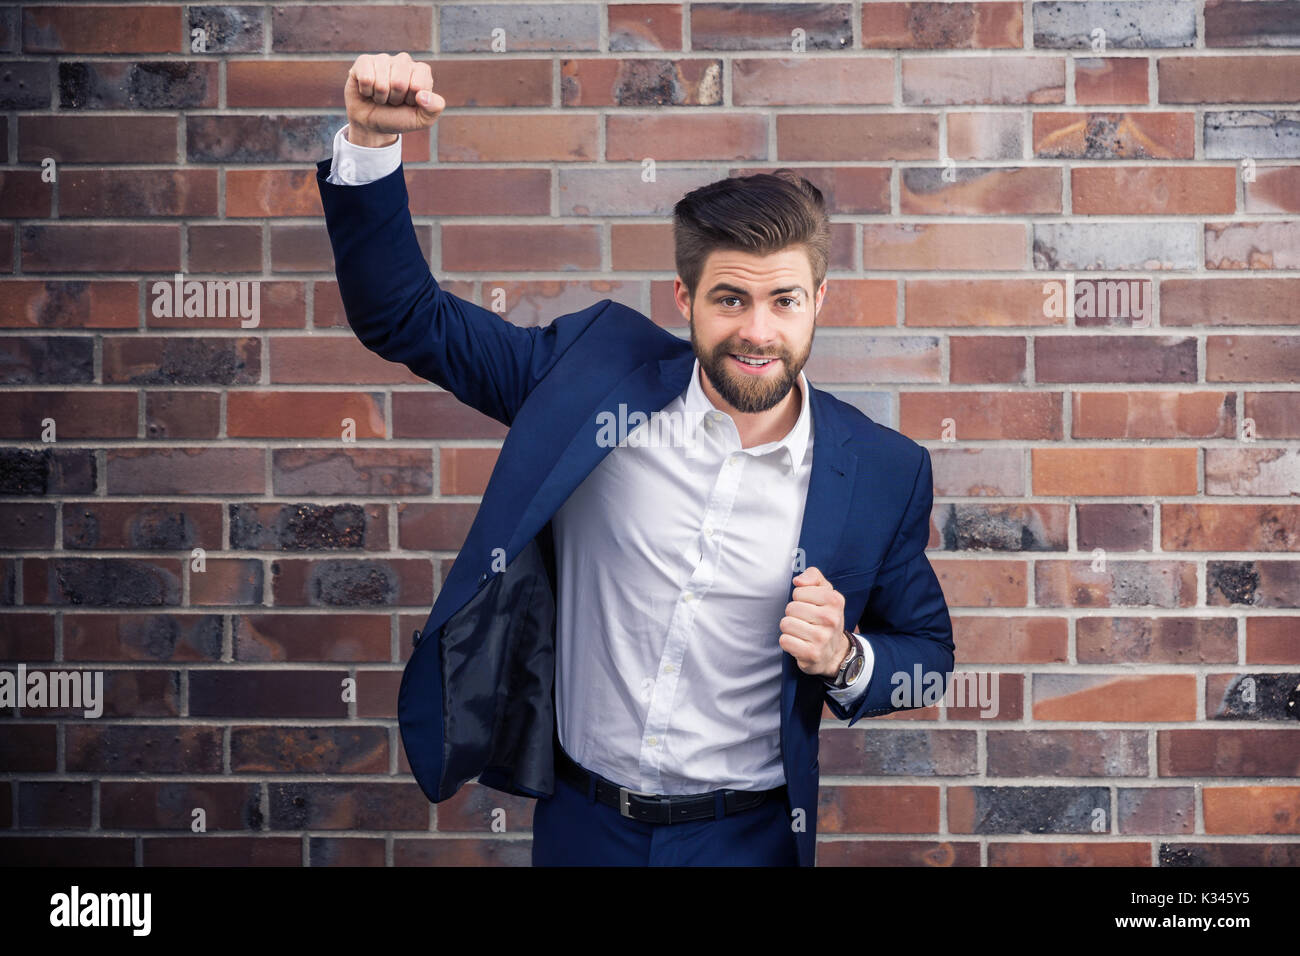 A photo of young, successful man wearing navy suit. Stock Photo